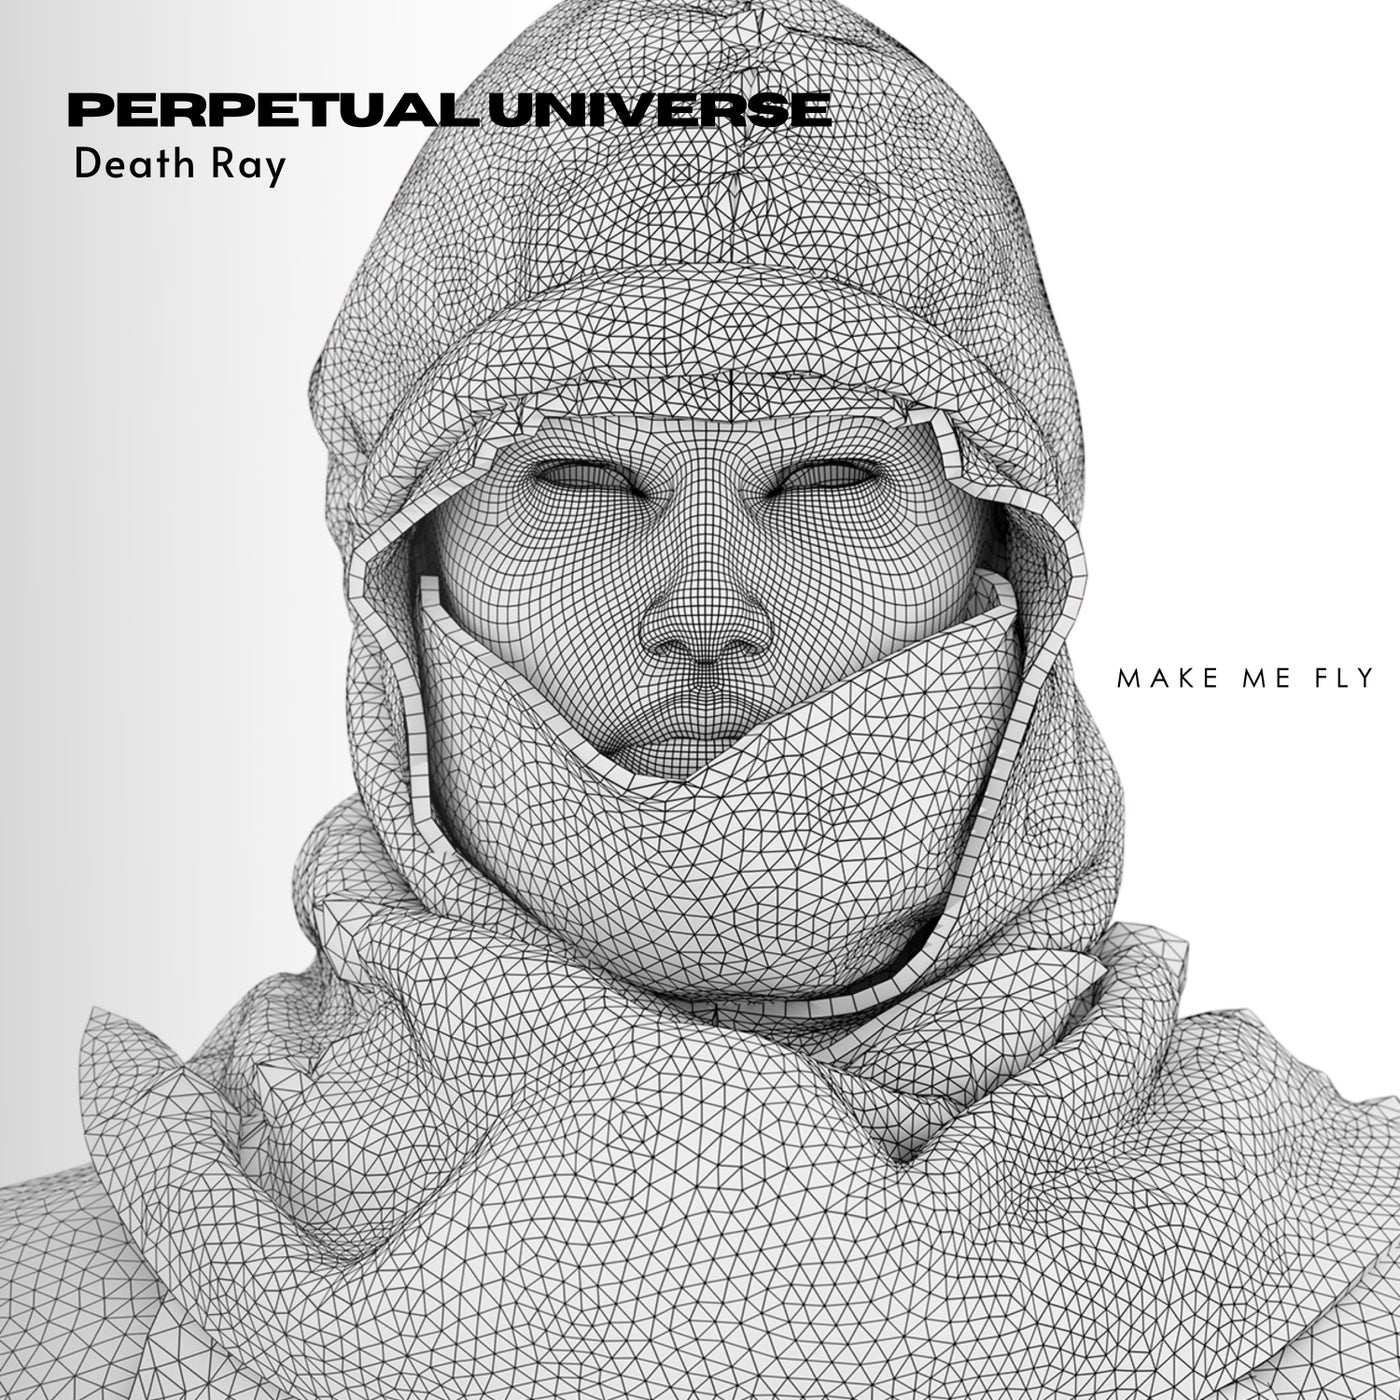 Perpetual Universe - Death Ray [MMF011]